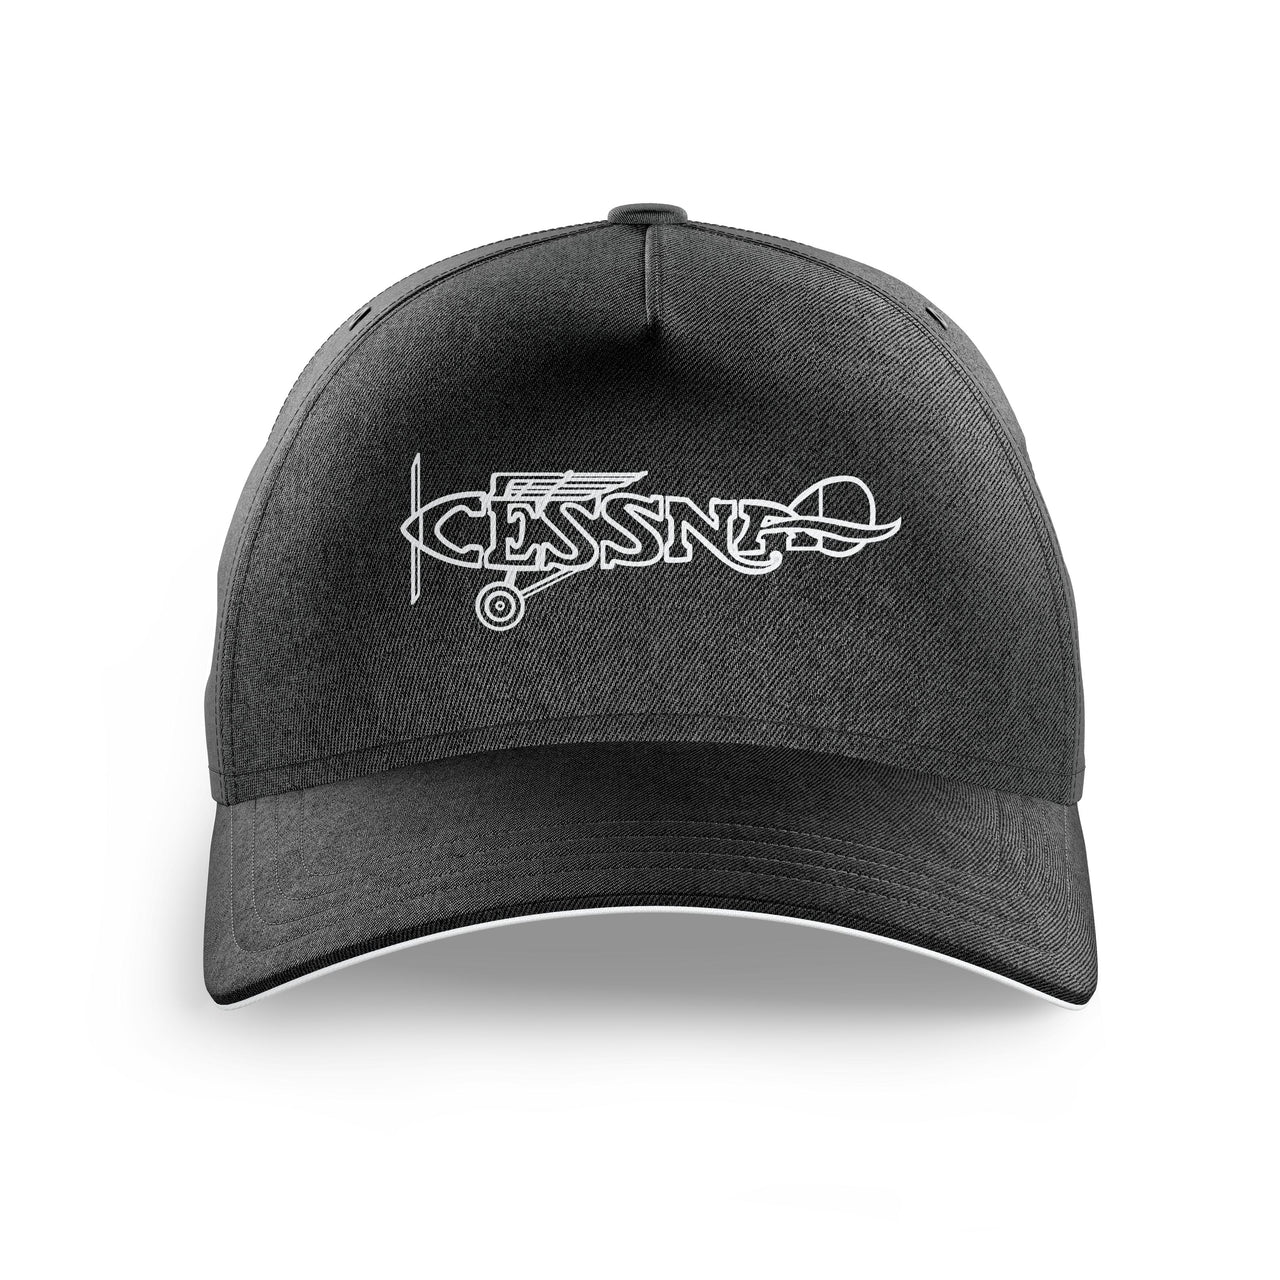 Special Cessna Text Printed Hats